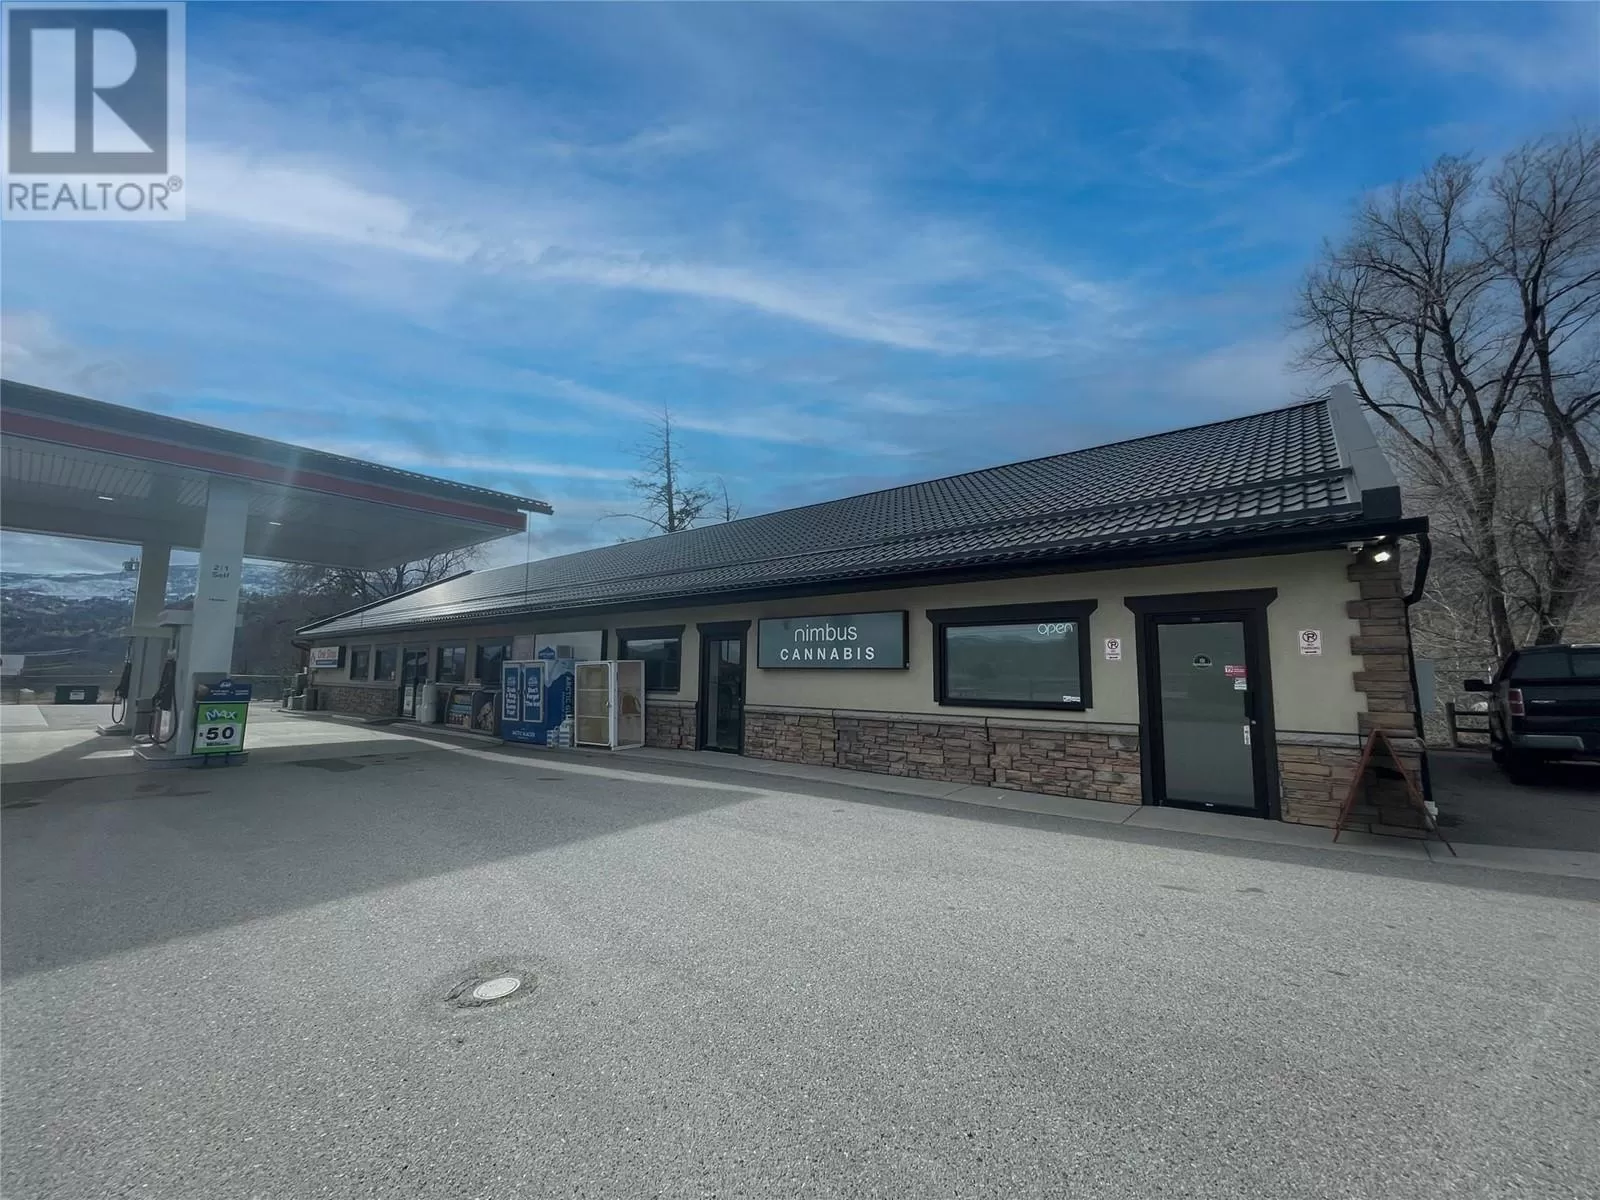 Retail for rent: 8102 97 Highway, Oliver, British Columbia V0H 1T2